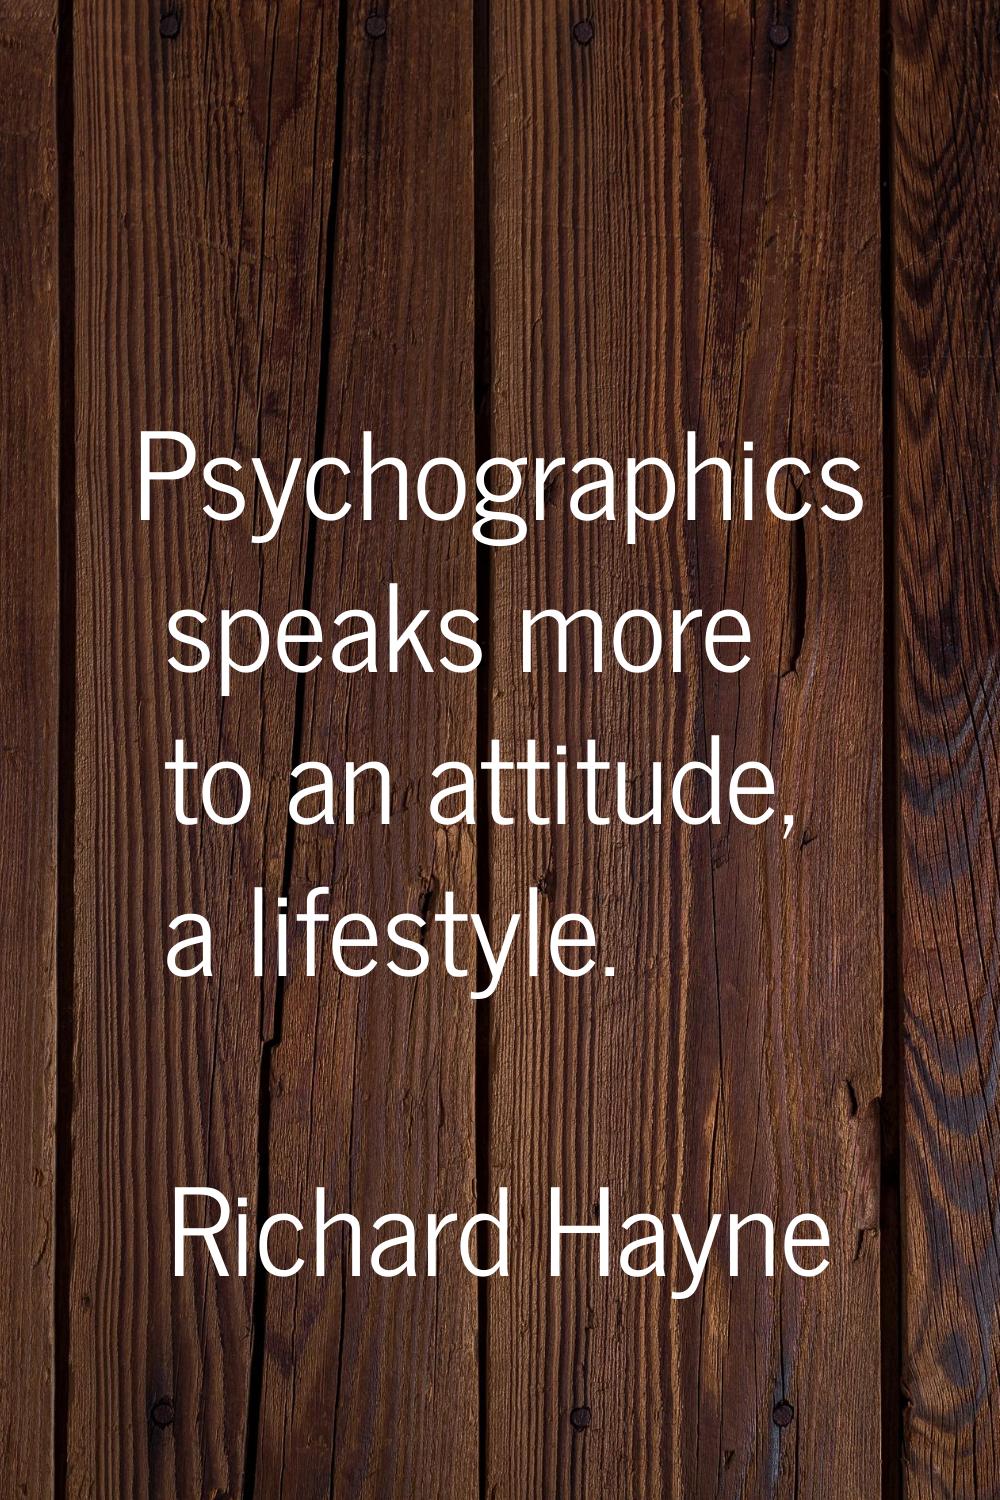 Psychographics speaks more to an attitude, a lifestyle.